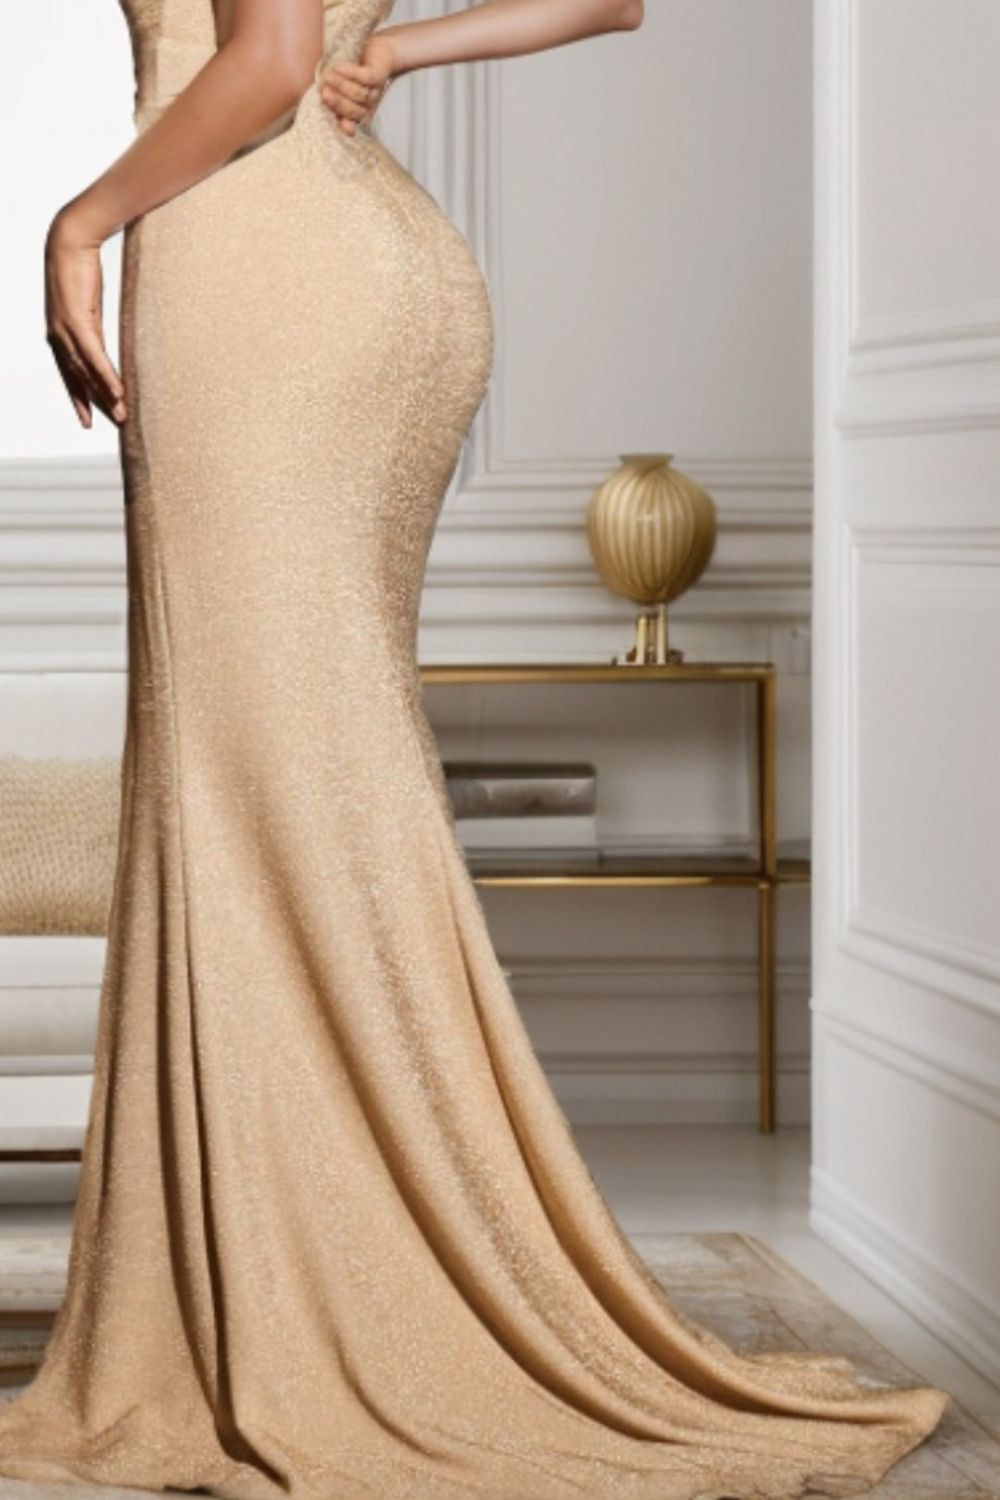 Elevate your evening look with our gold Slit Square Neck Dress, designed for elegance with a seductive slit and flattering square neckline.